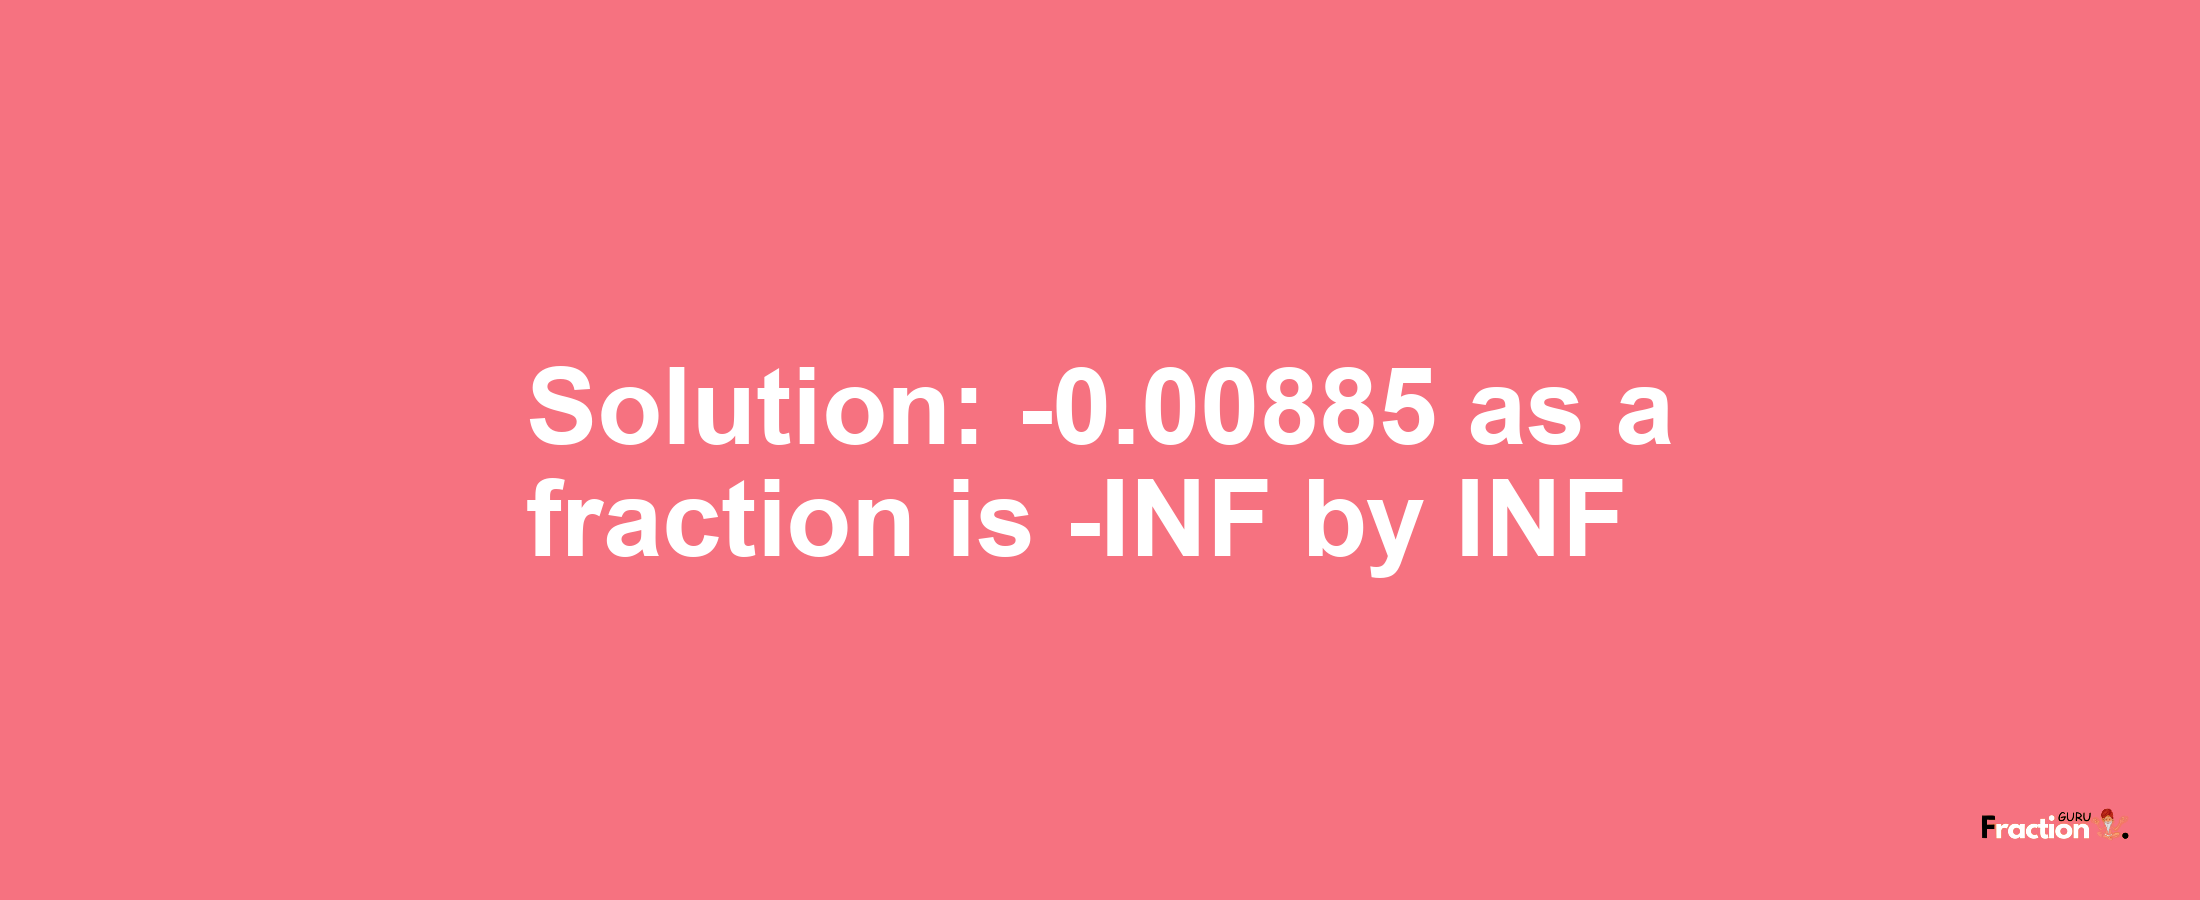 Solution:-0.00885 as a fraction is -INF/INF